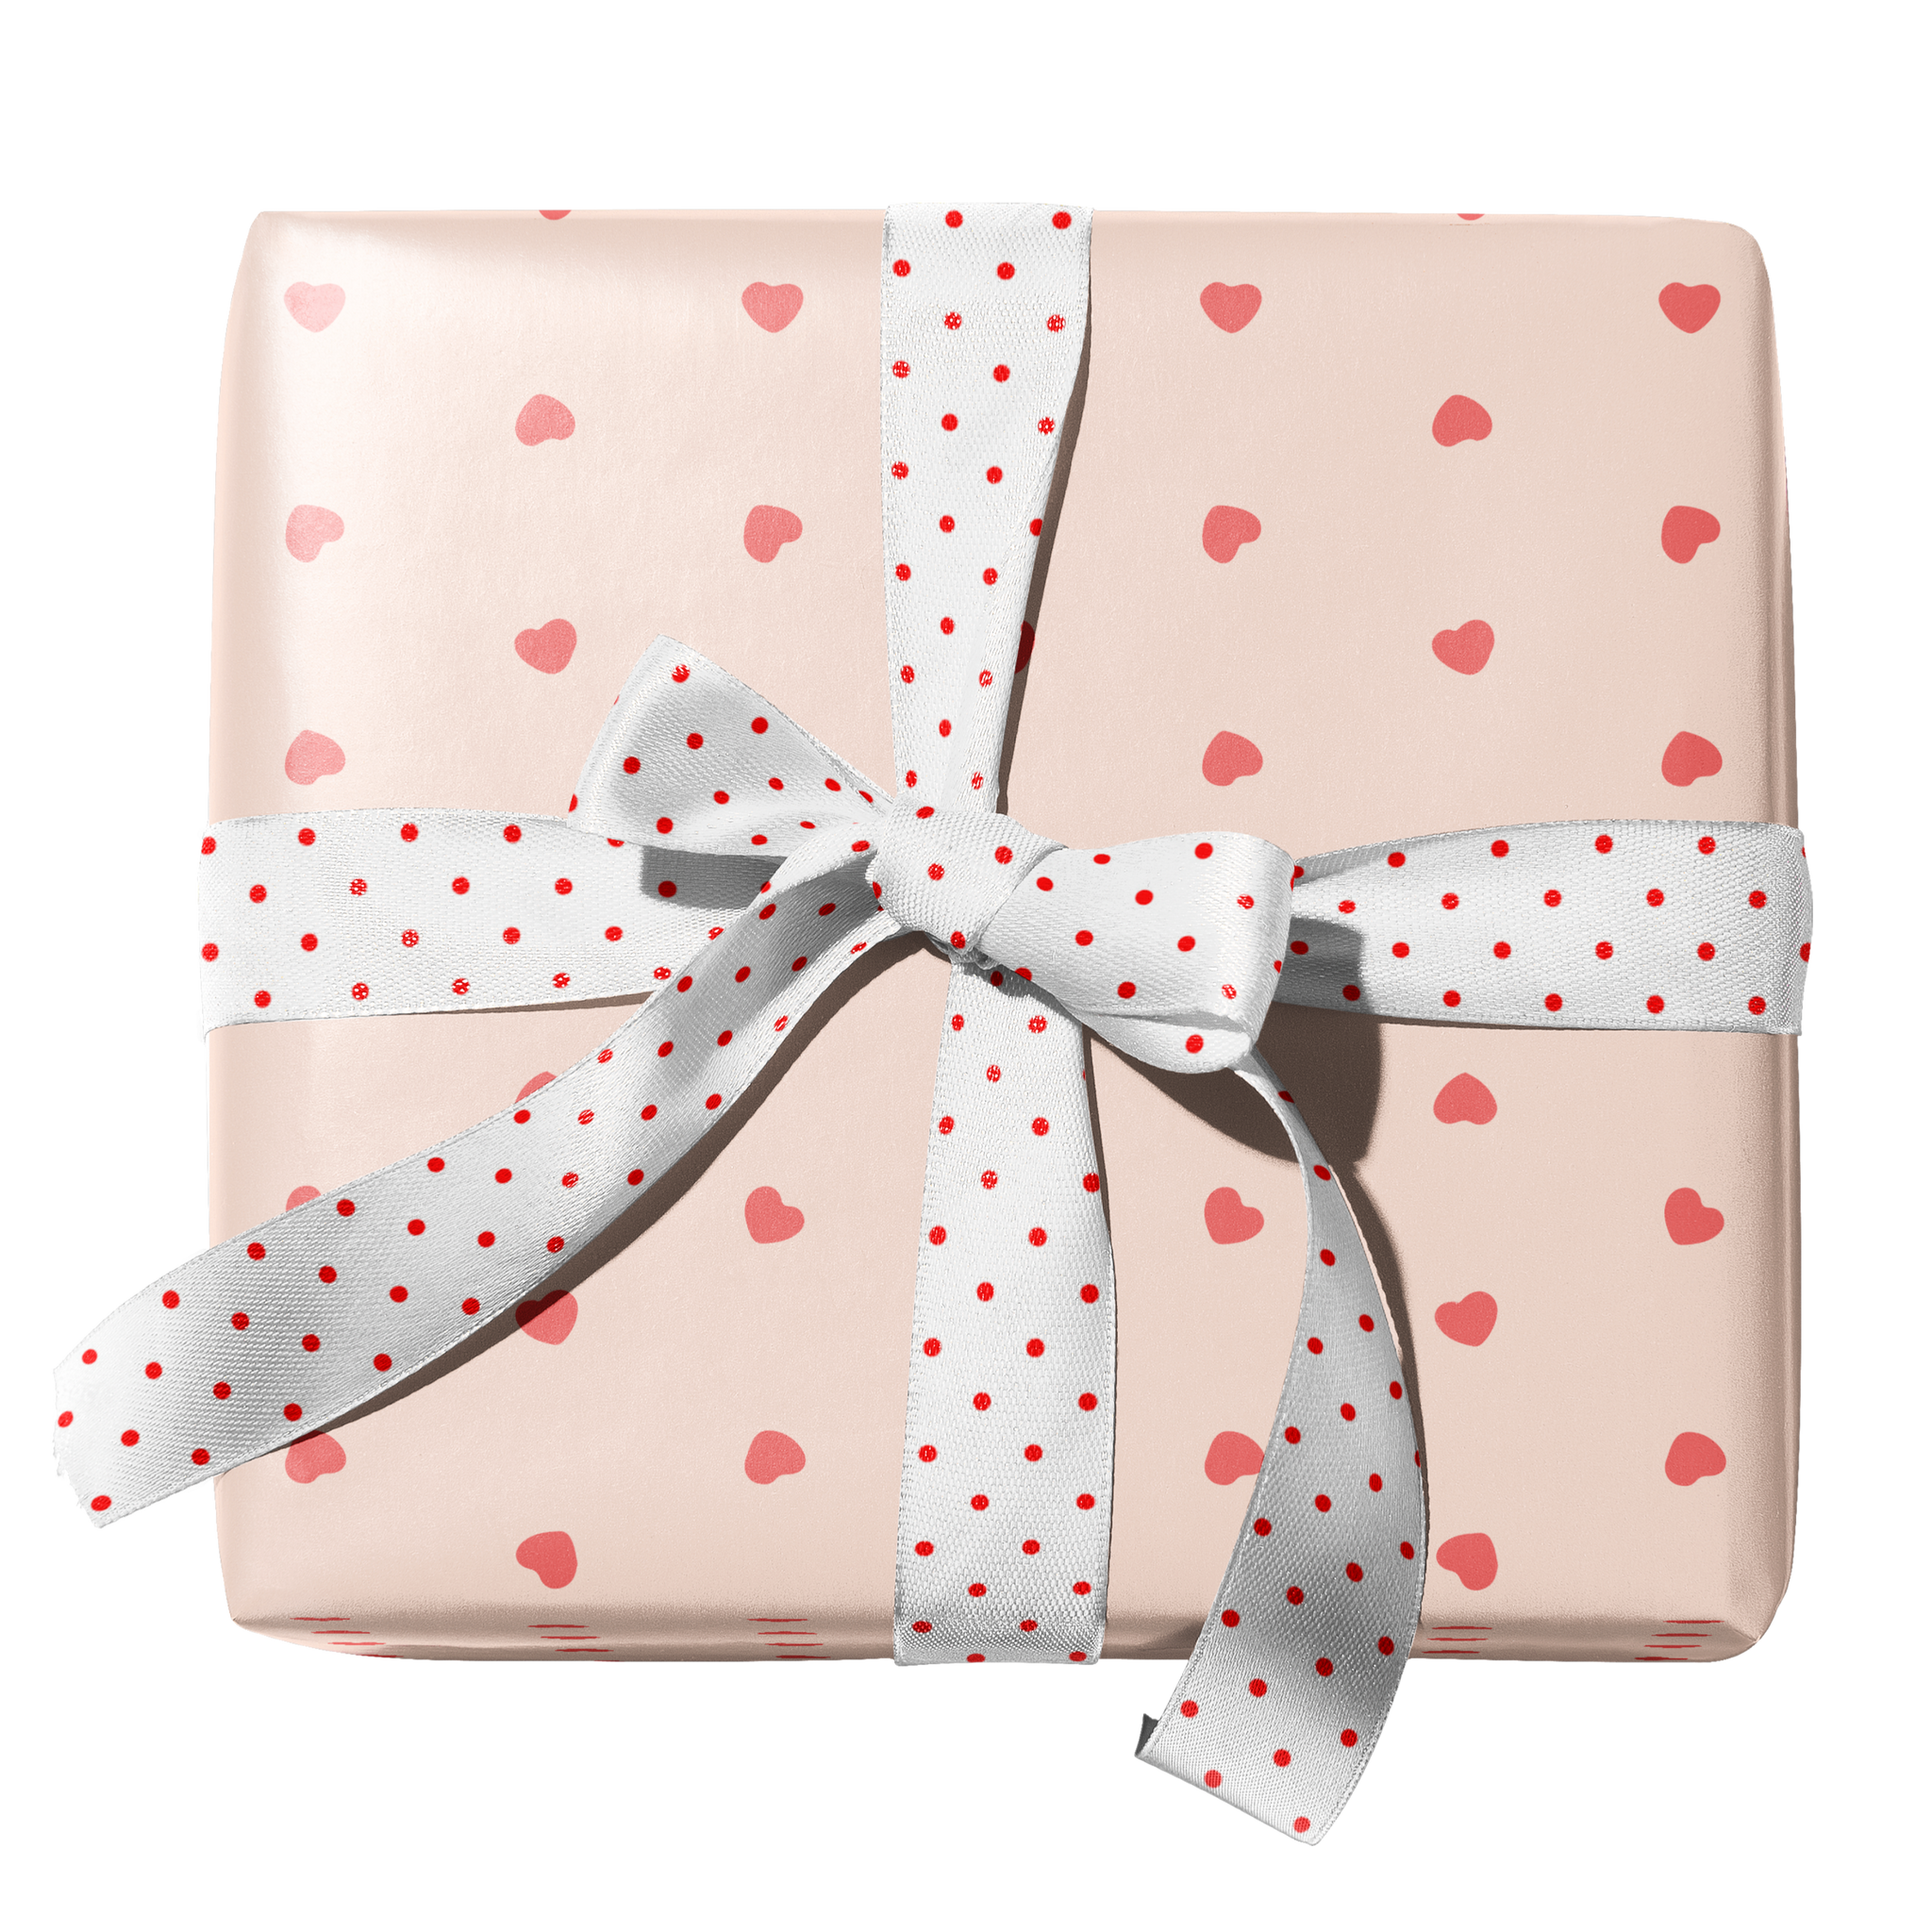 Celebrate Next 100sheets Coral Rose Pink and White Gift Wrap Pom Pom Color Tissue Paper Mix with 12 to from Gift Tags & Twine